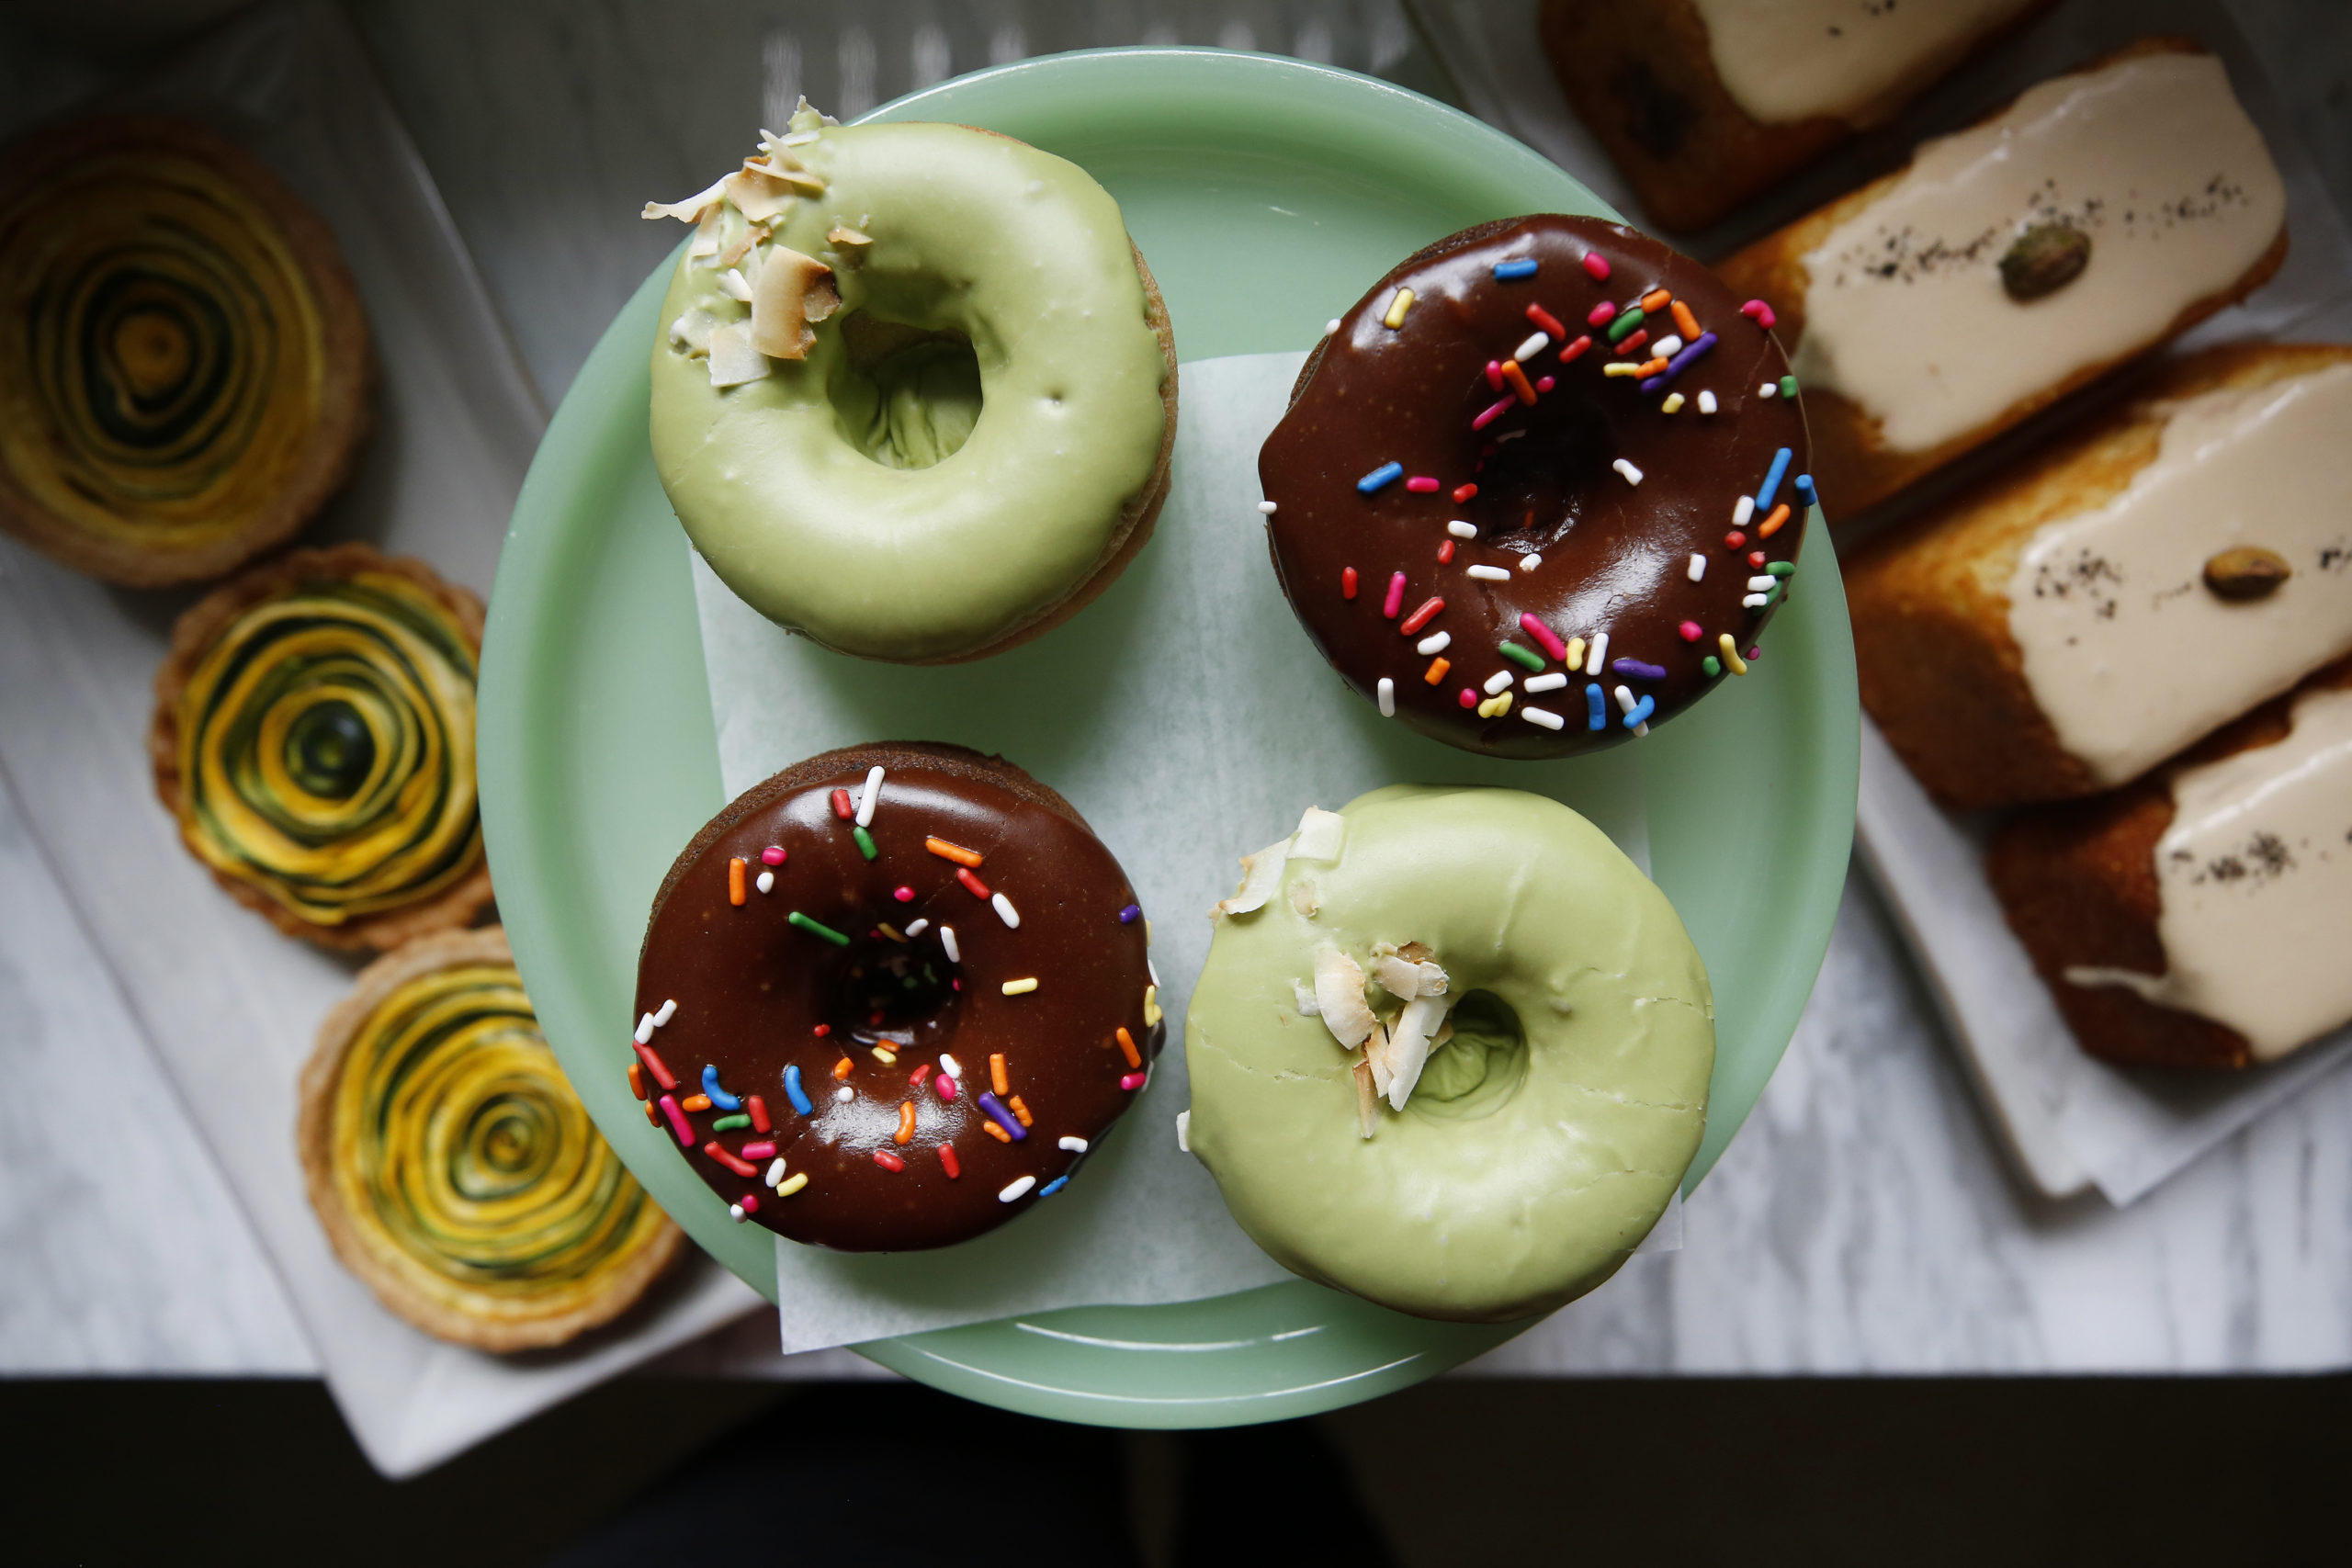 Mochi donuts, gluten-free summer squash tartlets, left, and Earl Grey polenta olive oil cakes, right, at The Altamont General Store in Occidental. (Beth Schlanker/Sonoma Magazine)